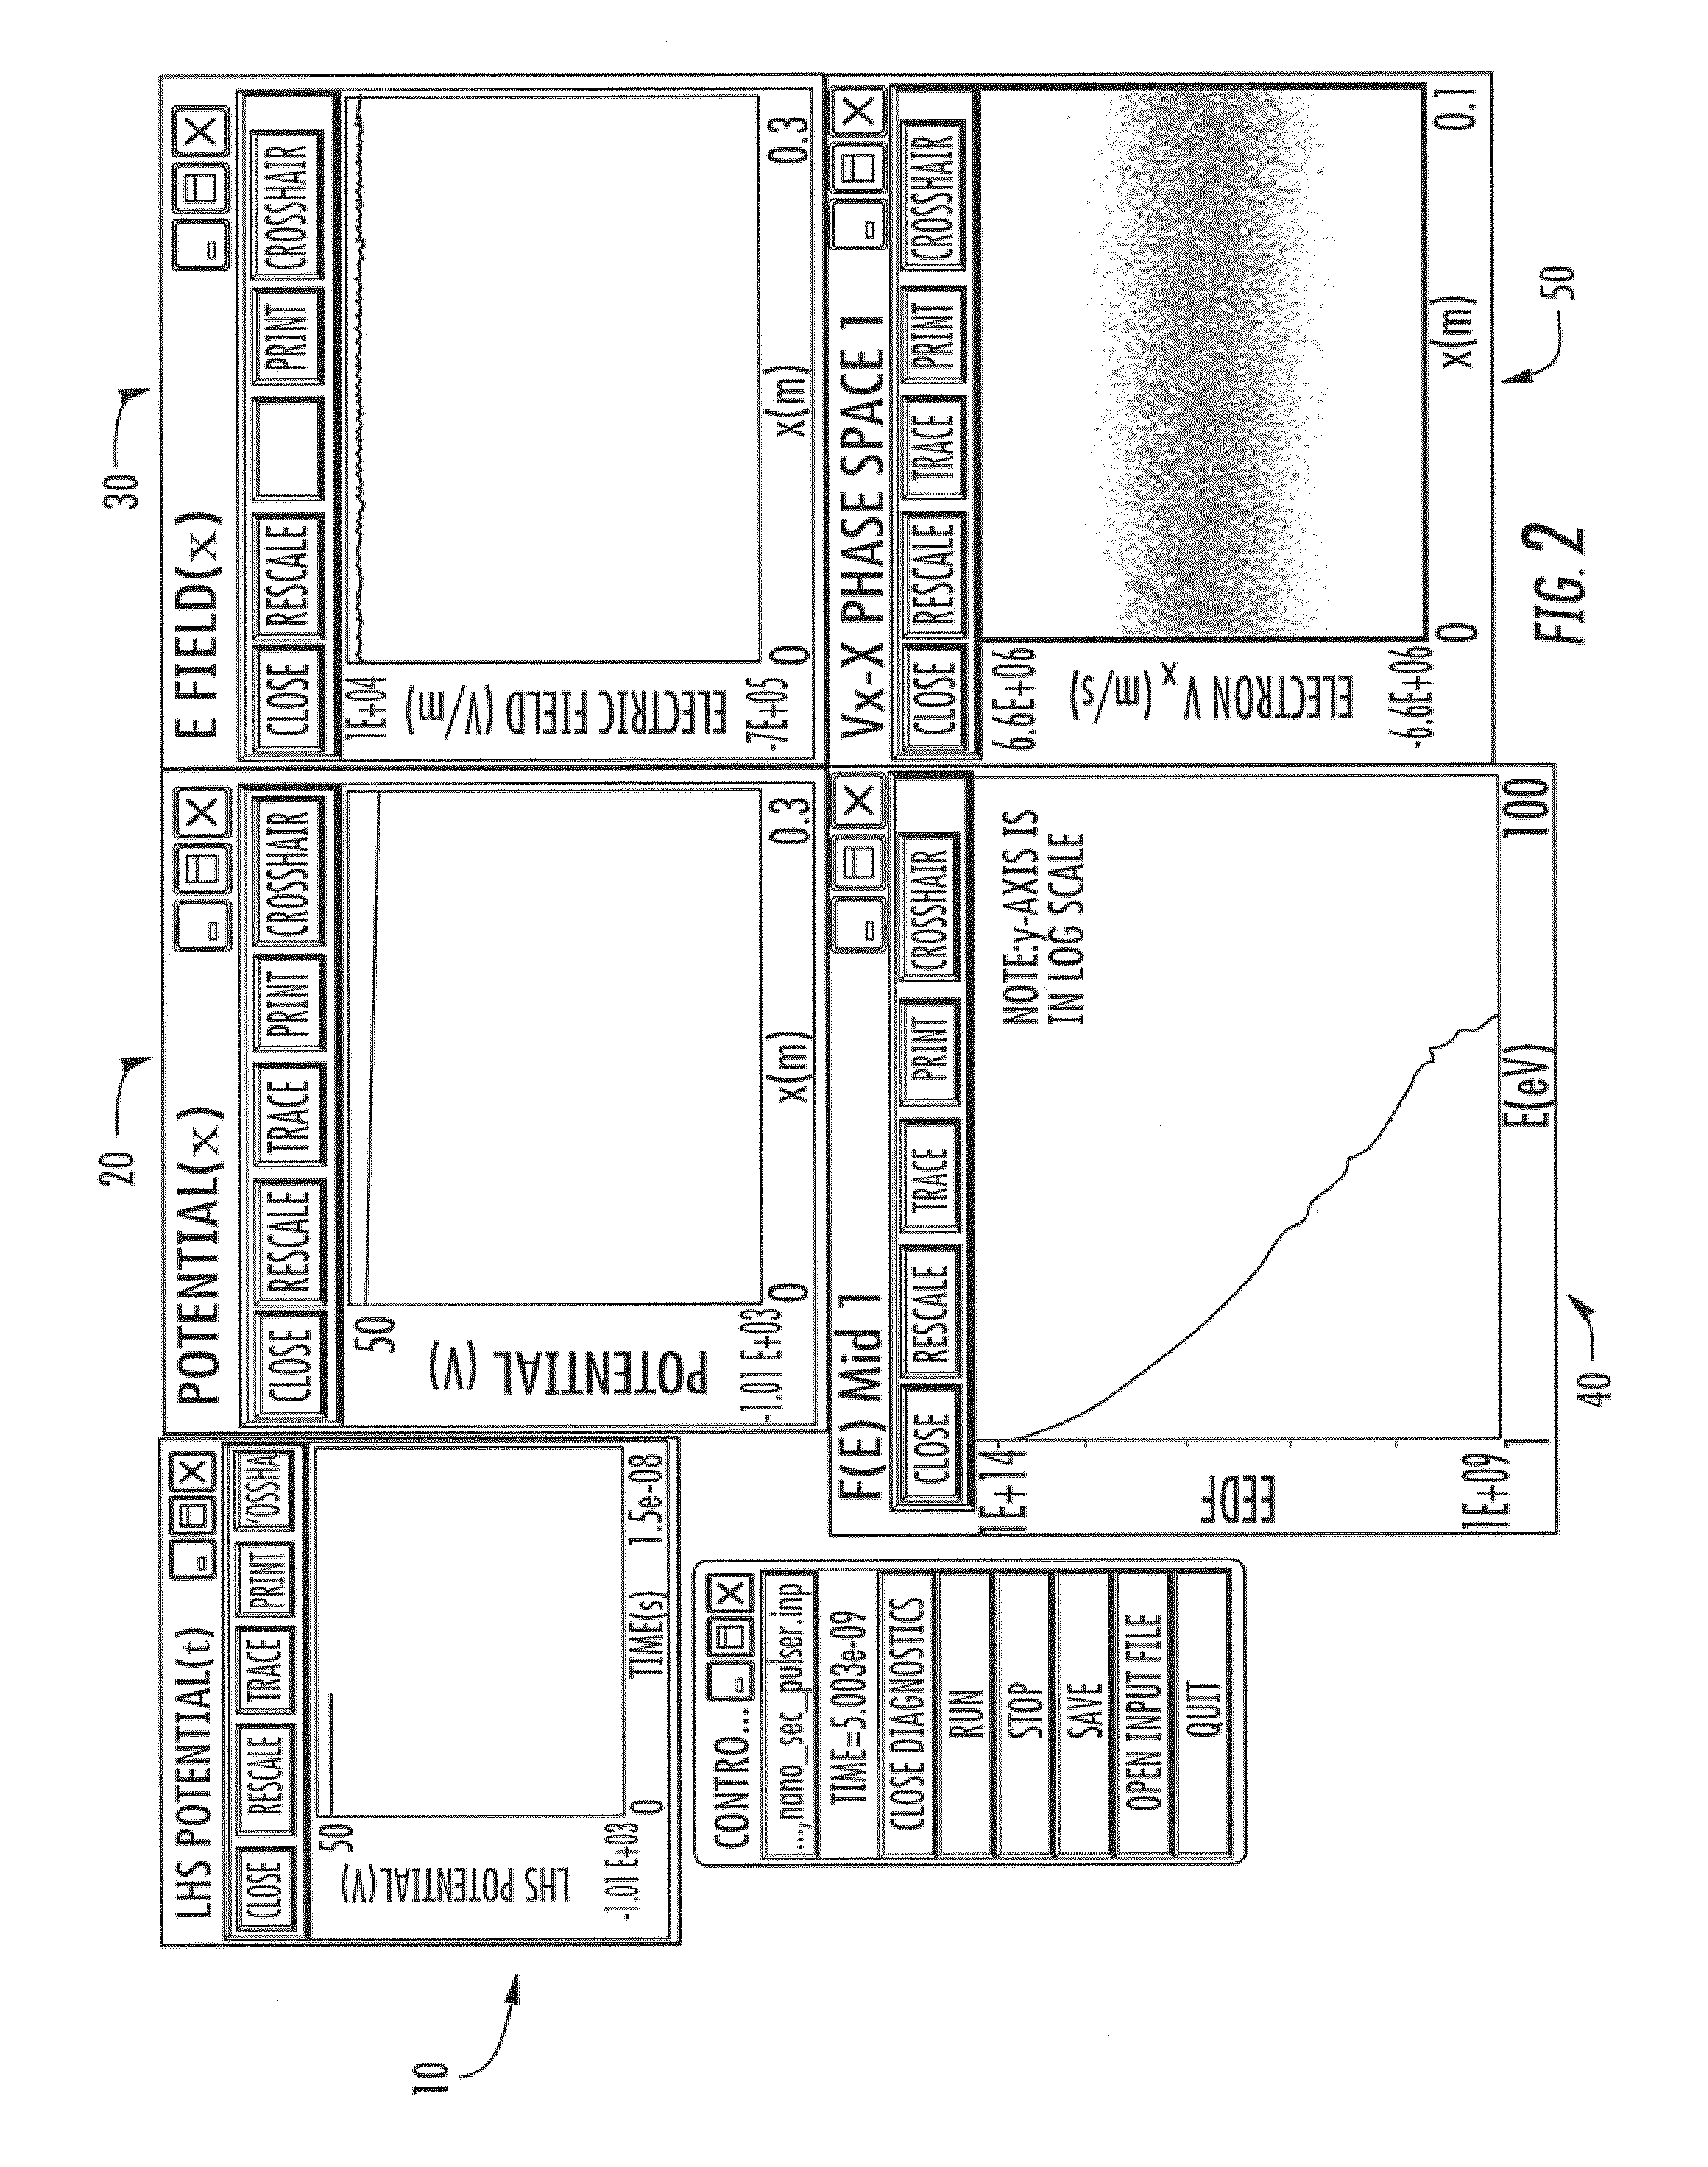 System and method for selectively controlling ion composition of ion sources